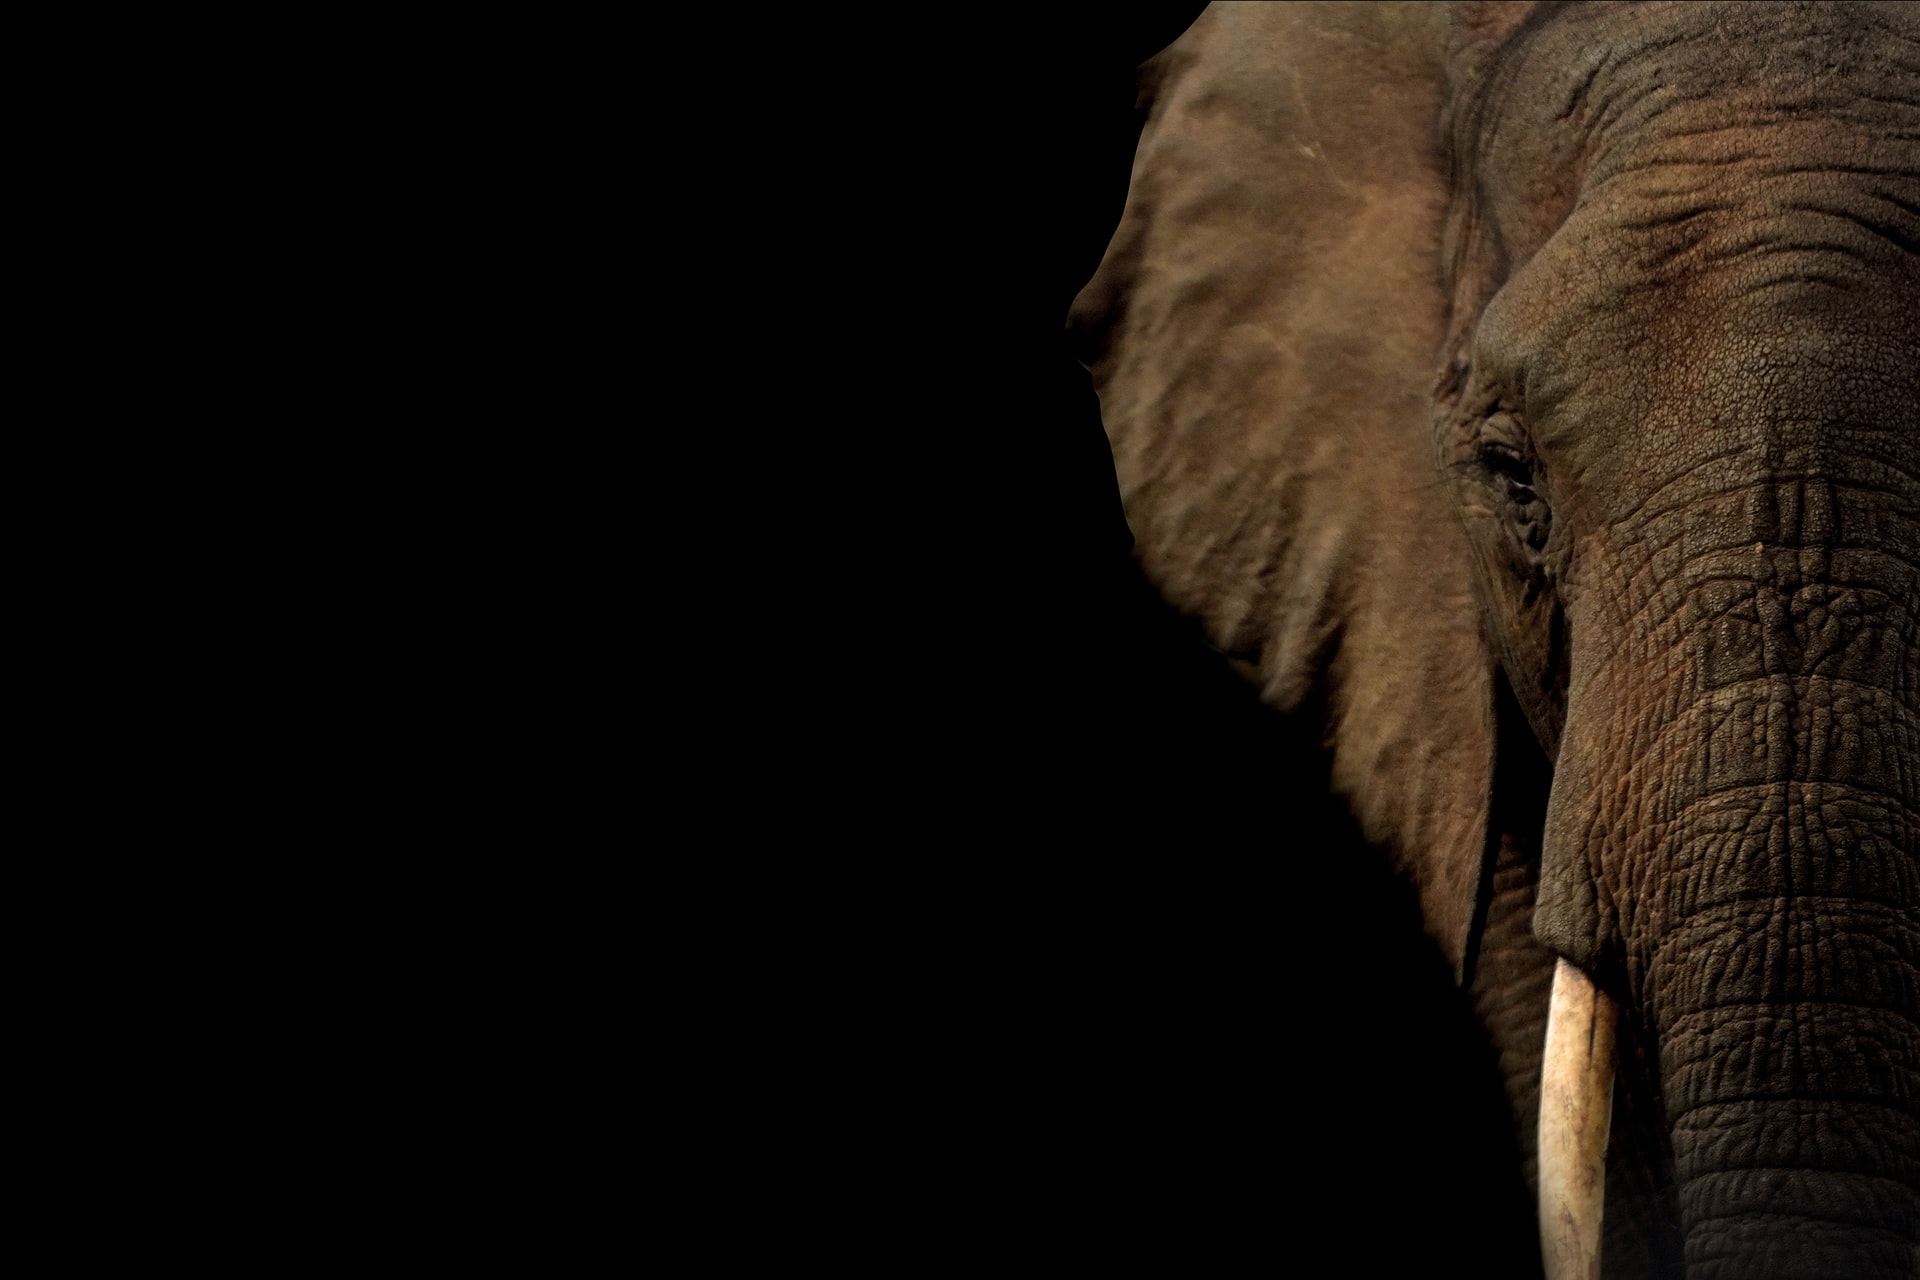 Half face of an elephant on black background